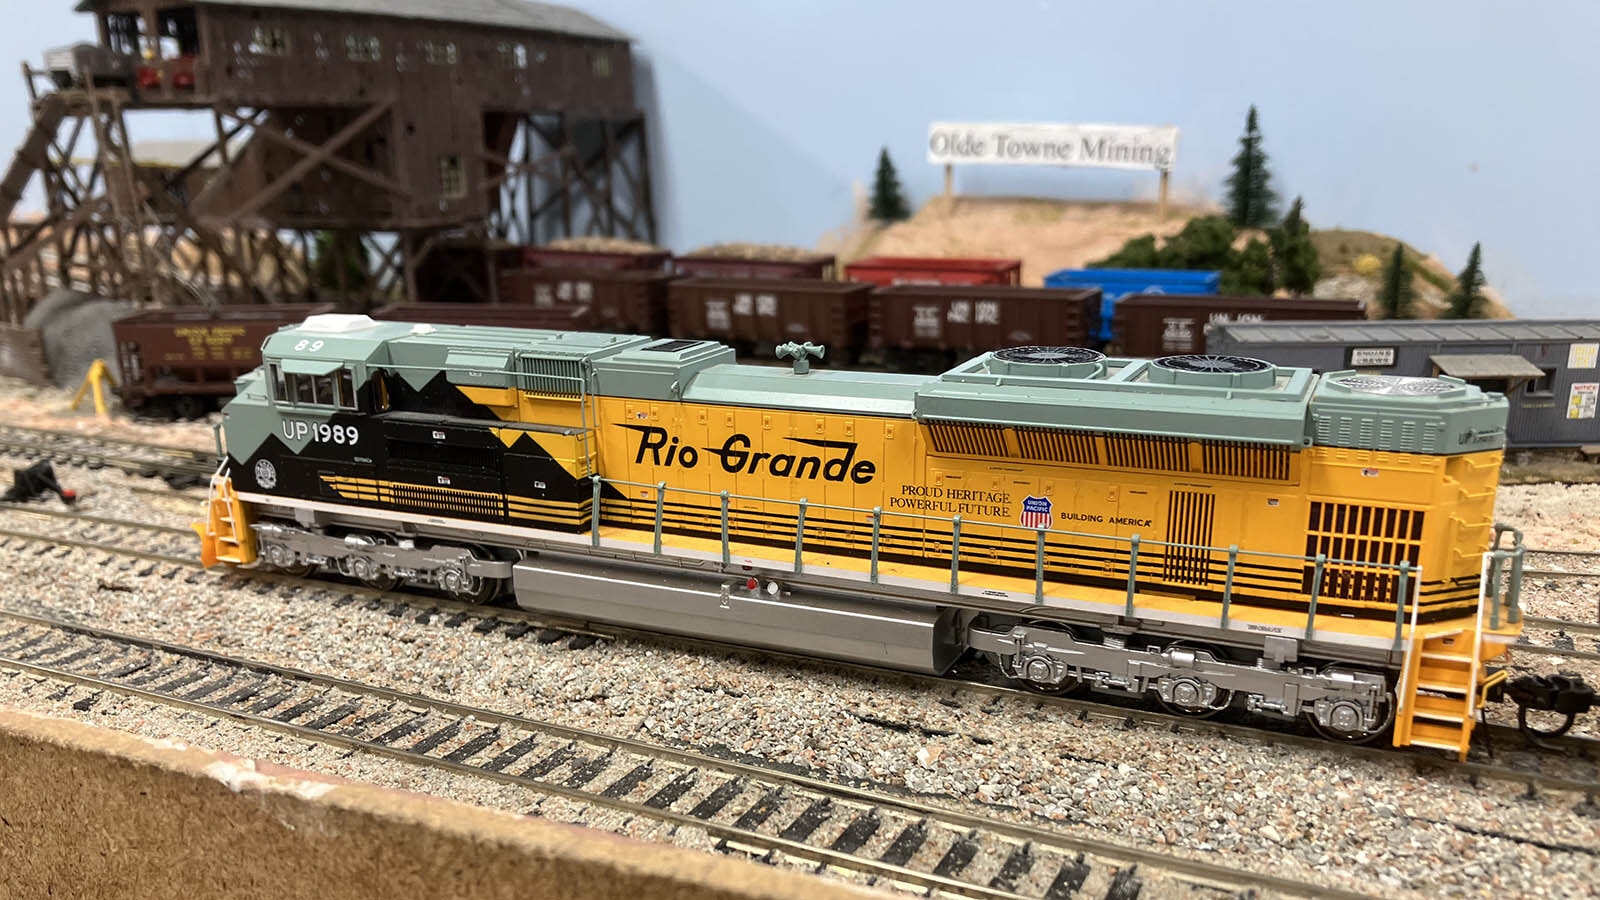 A replica Union Pacific locomotive painted in paint scheme to honor the Rio Grande line is part of the club’s collection of locomotives.